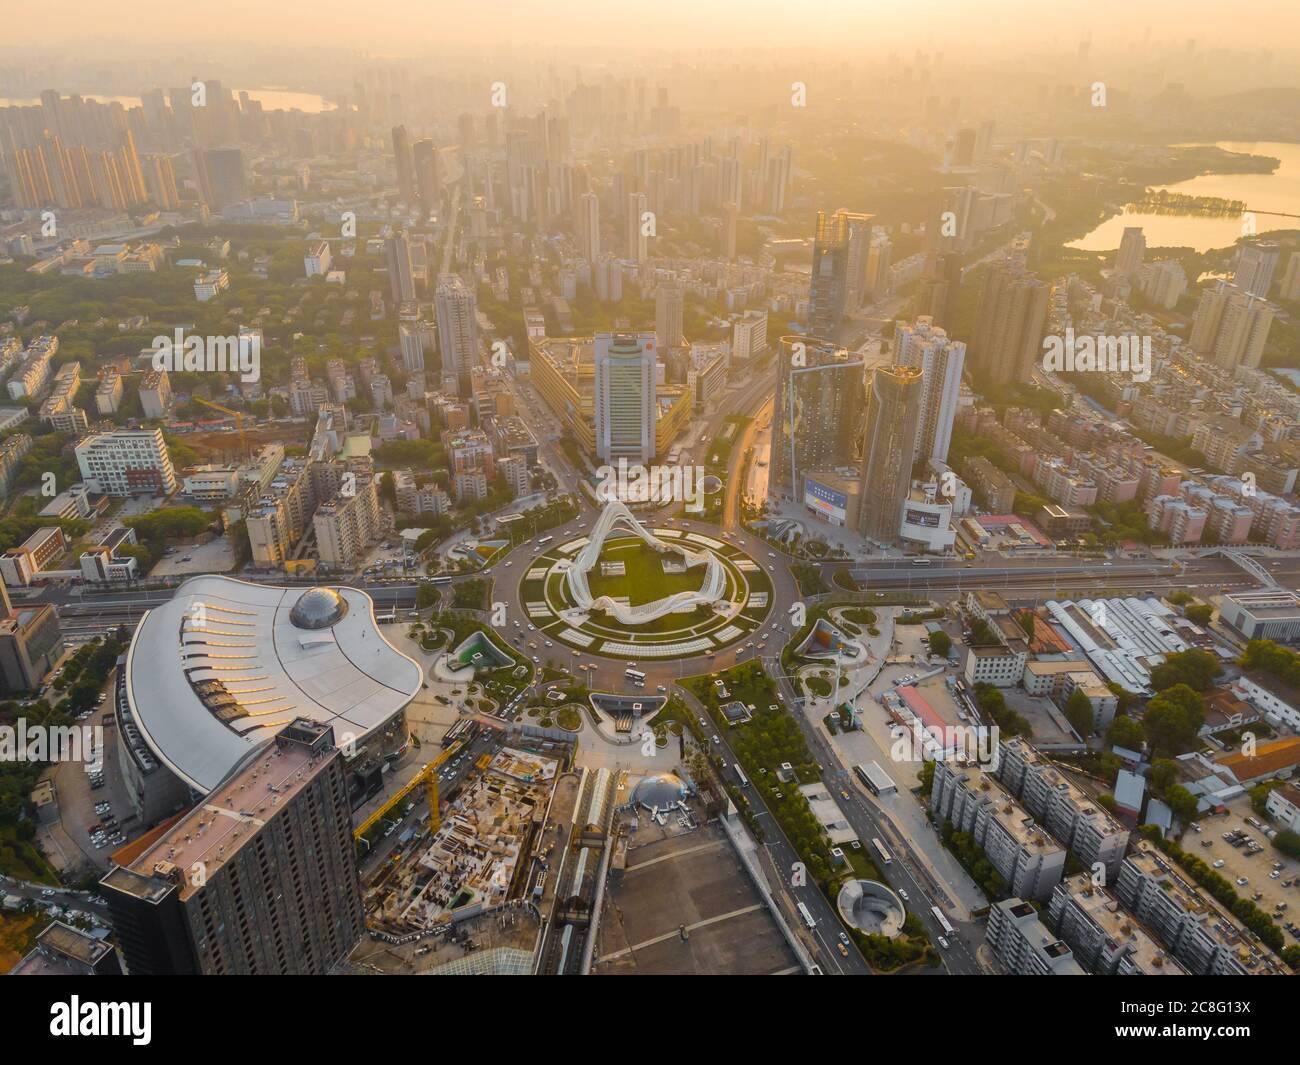 Cityscape of Optics Valley, Wuhan.Wuhan city  at night.Panoramic skyline and buildings in financial district. Stock Photo